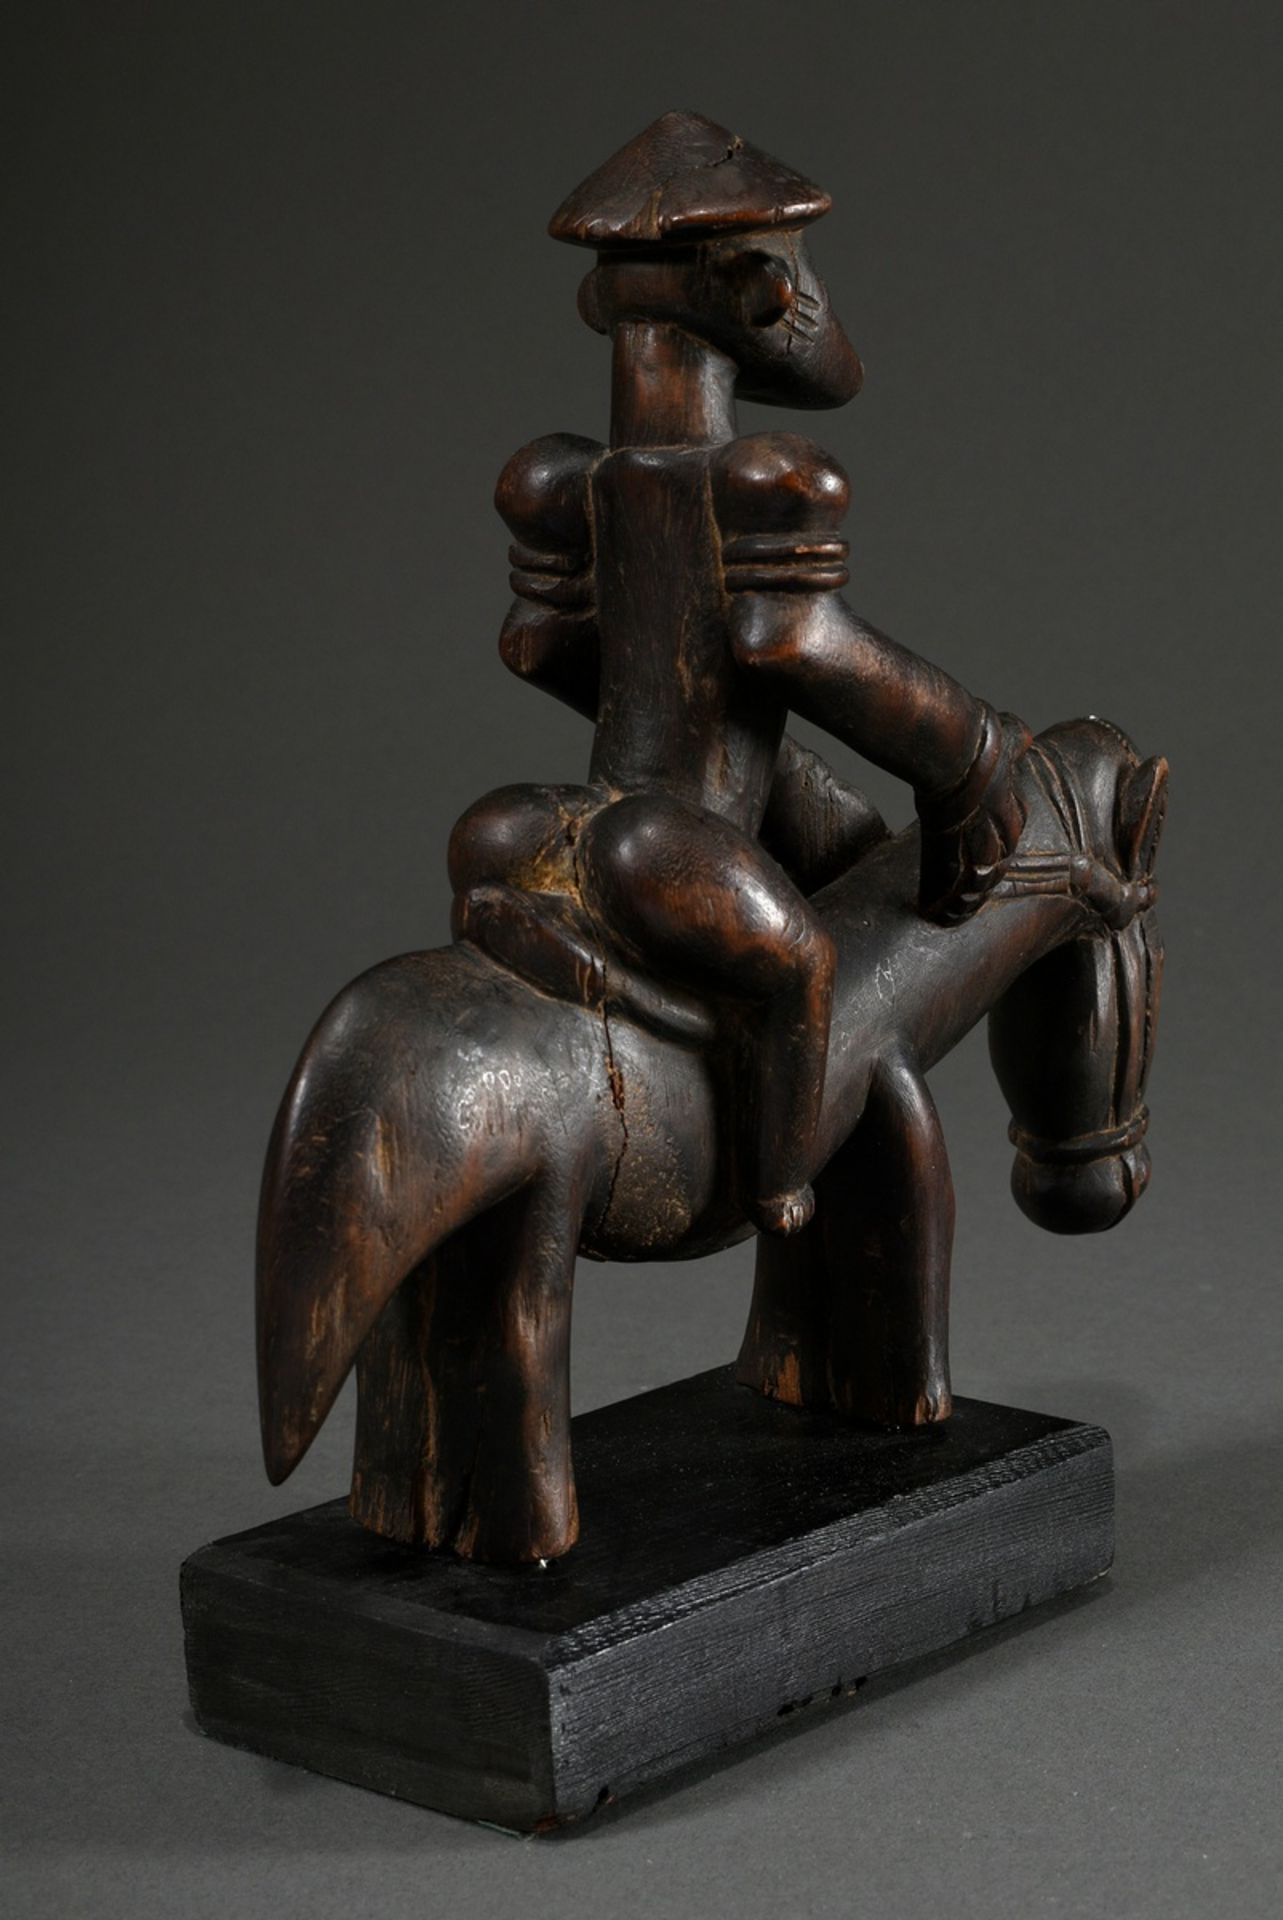 Equestrian statuette of a muscular figure with pointed headgear and scarification marks on the body - Image 3 of 3